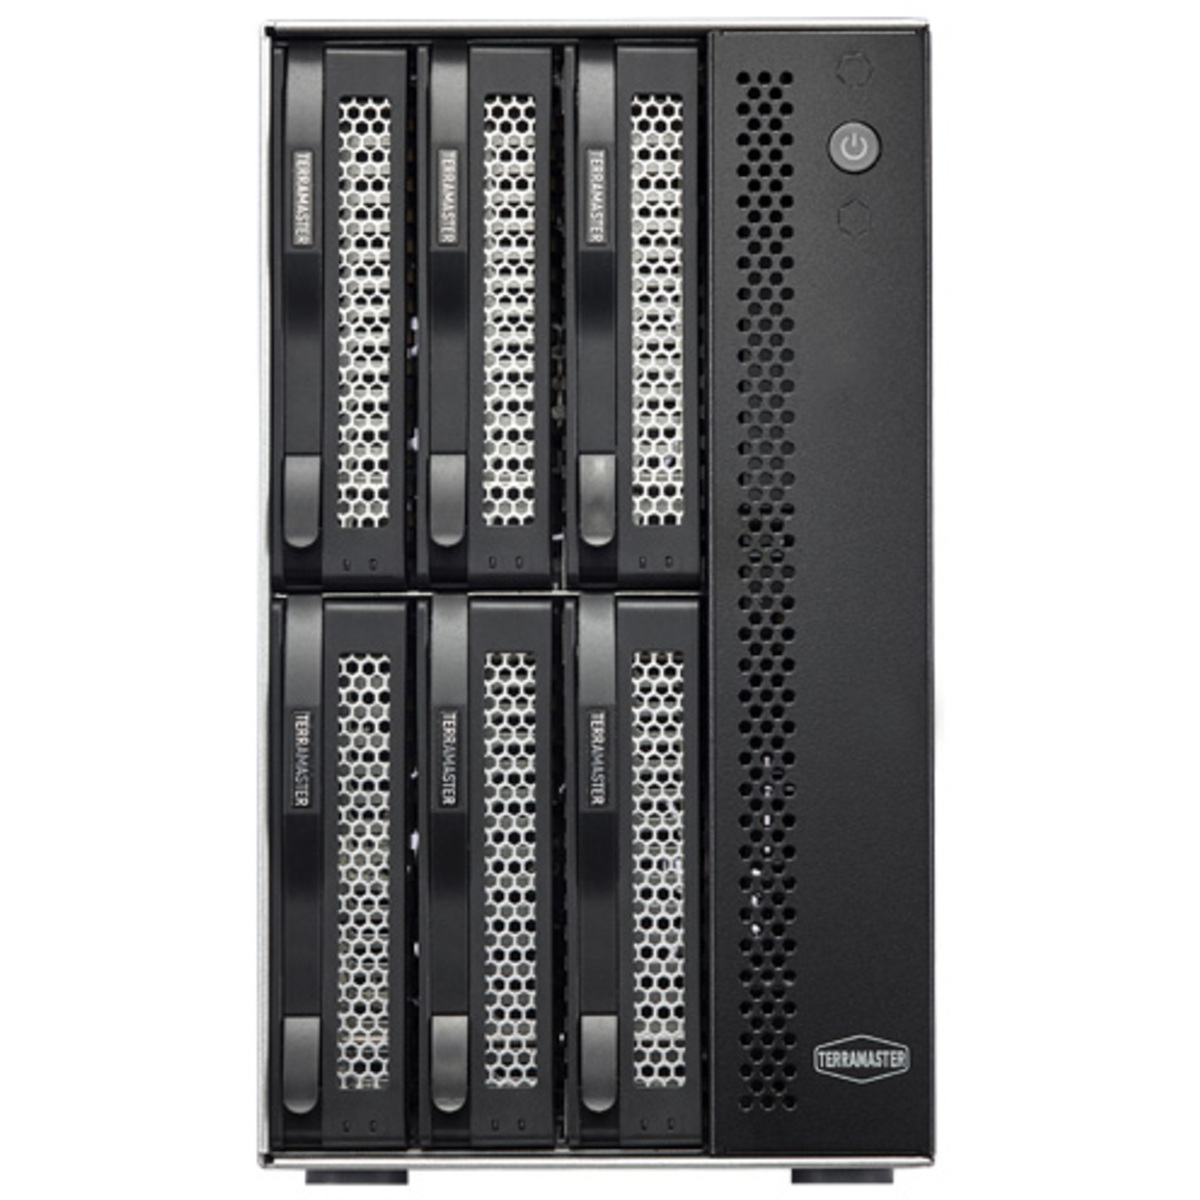 TerraMaster T6-423 48tb 6-Bay Desktop Multimedia / Power User / Business NAS - Network Attached Storage Device 6x8tb Western Digital Red Plus WD80EFPX 3.5 7200rpm SATA 6Gb/s HDD NAS Class Drives Installed - Burn-In Tested - FREE RAM UPGRADE T6-423